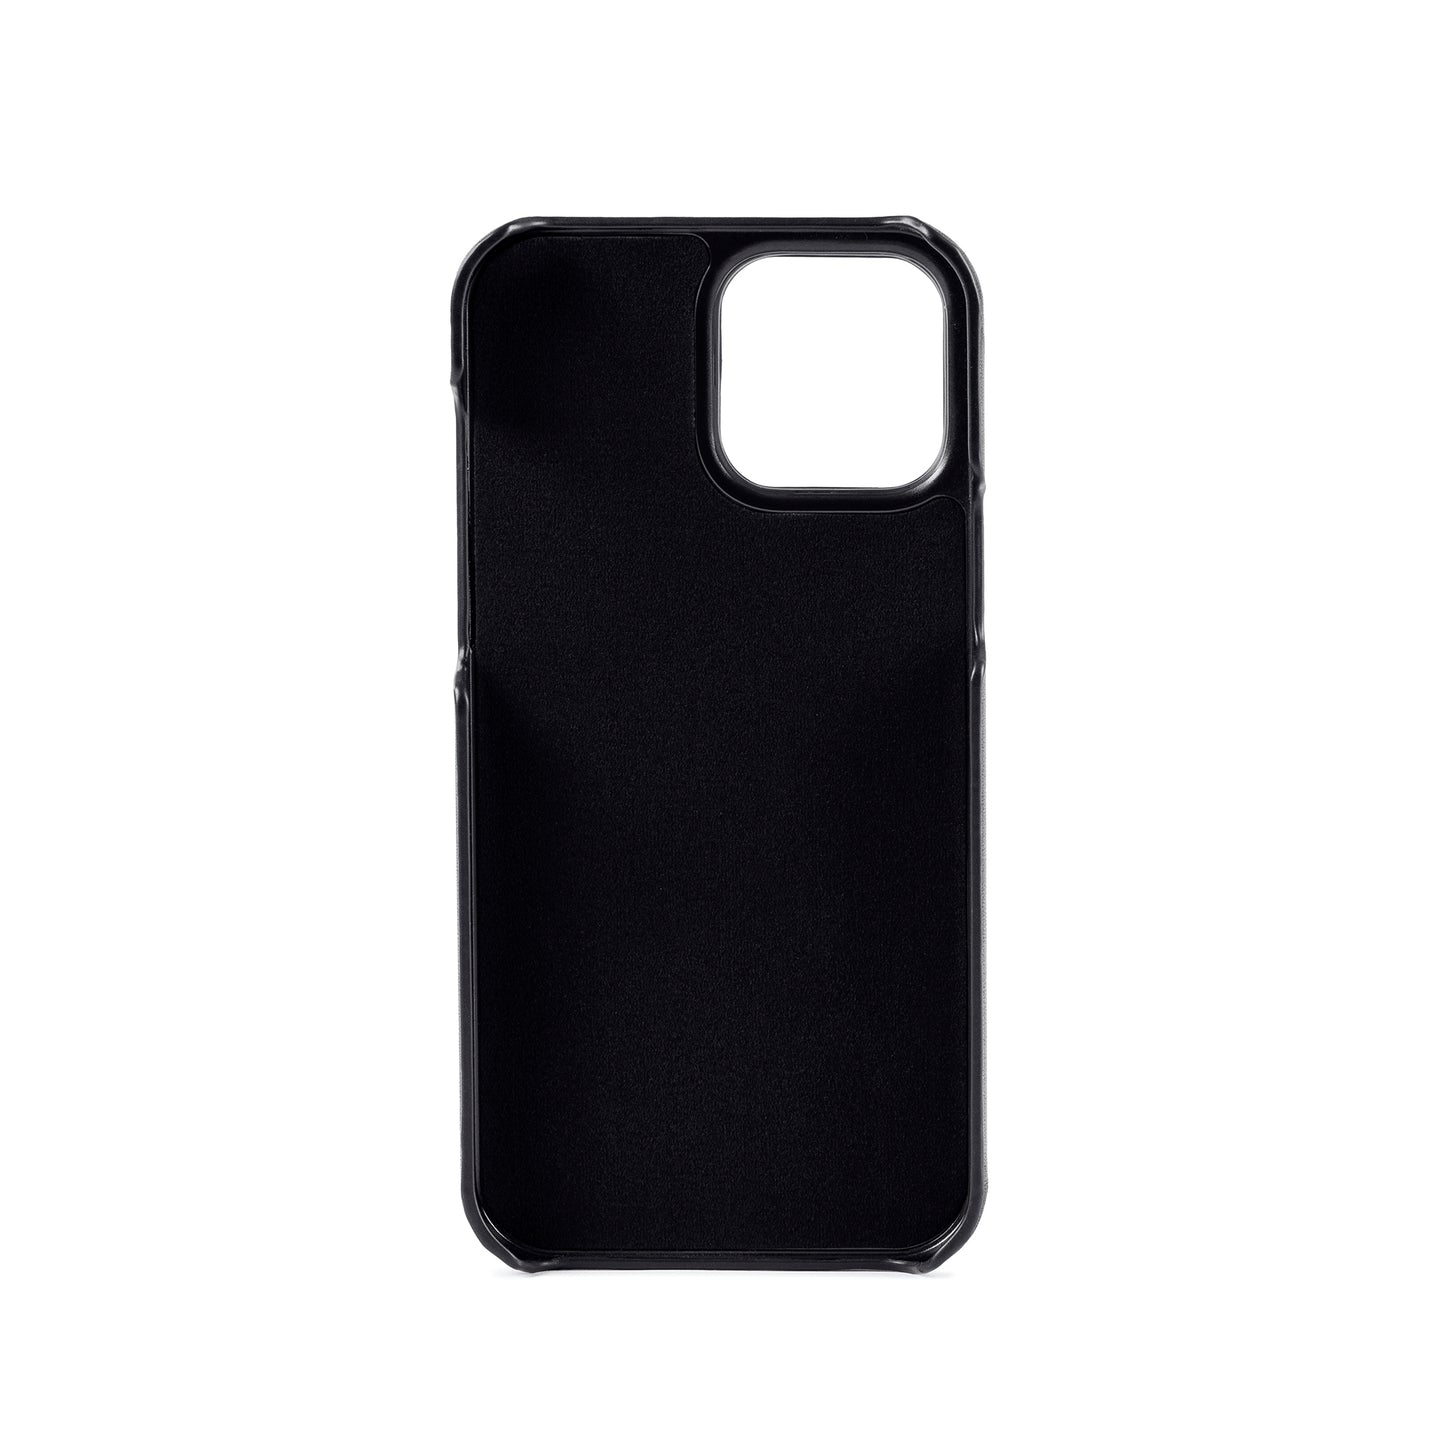 HISHULT IPhone wallet case 13 Pro Max Black